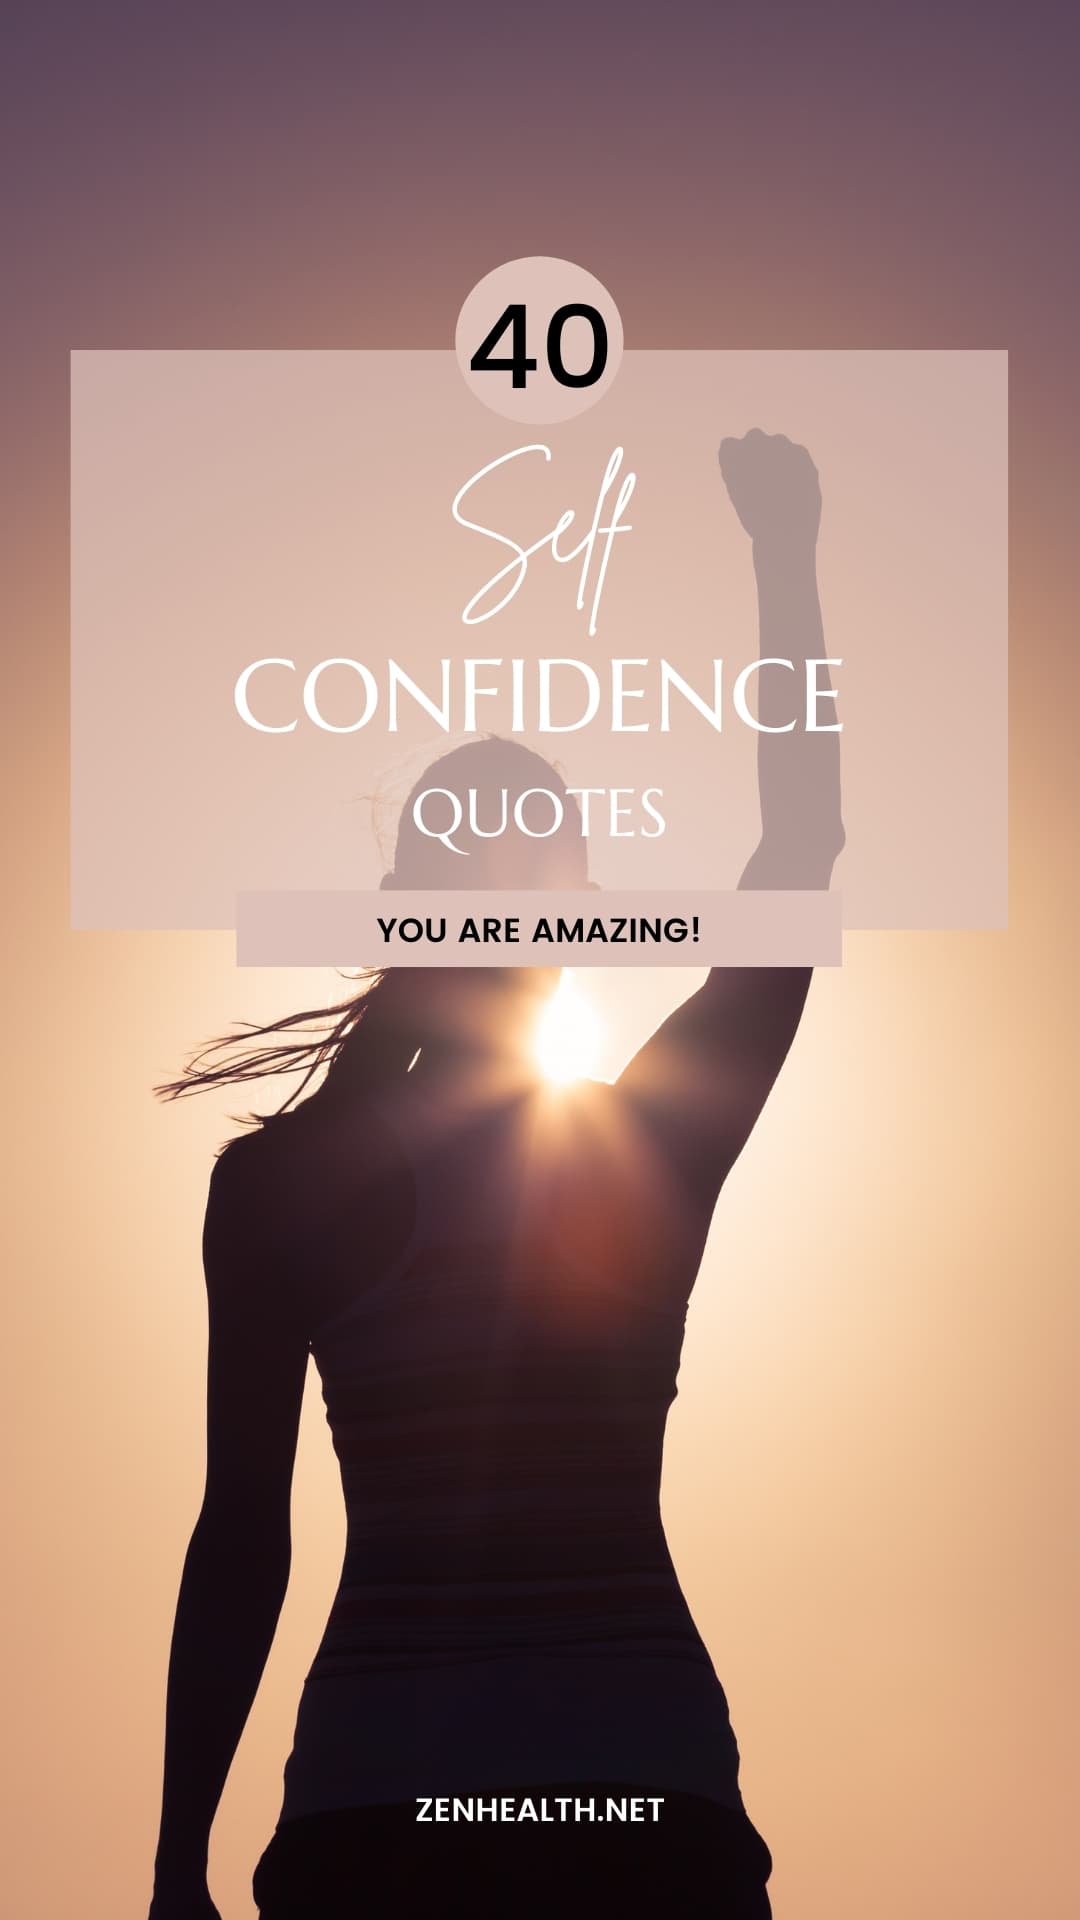 40 self confidence quotes